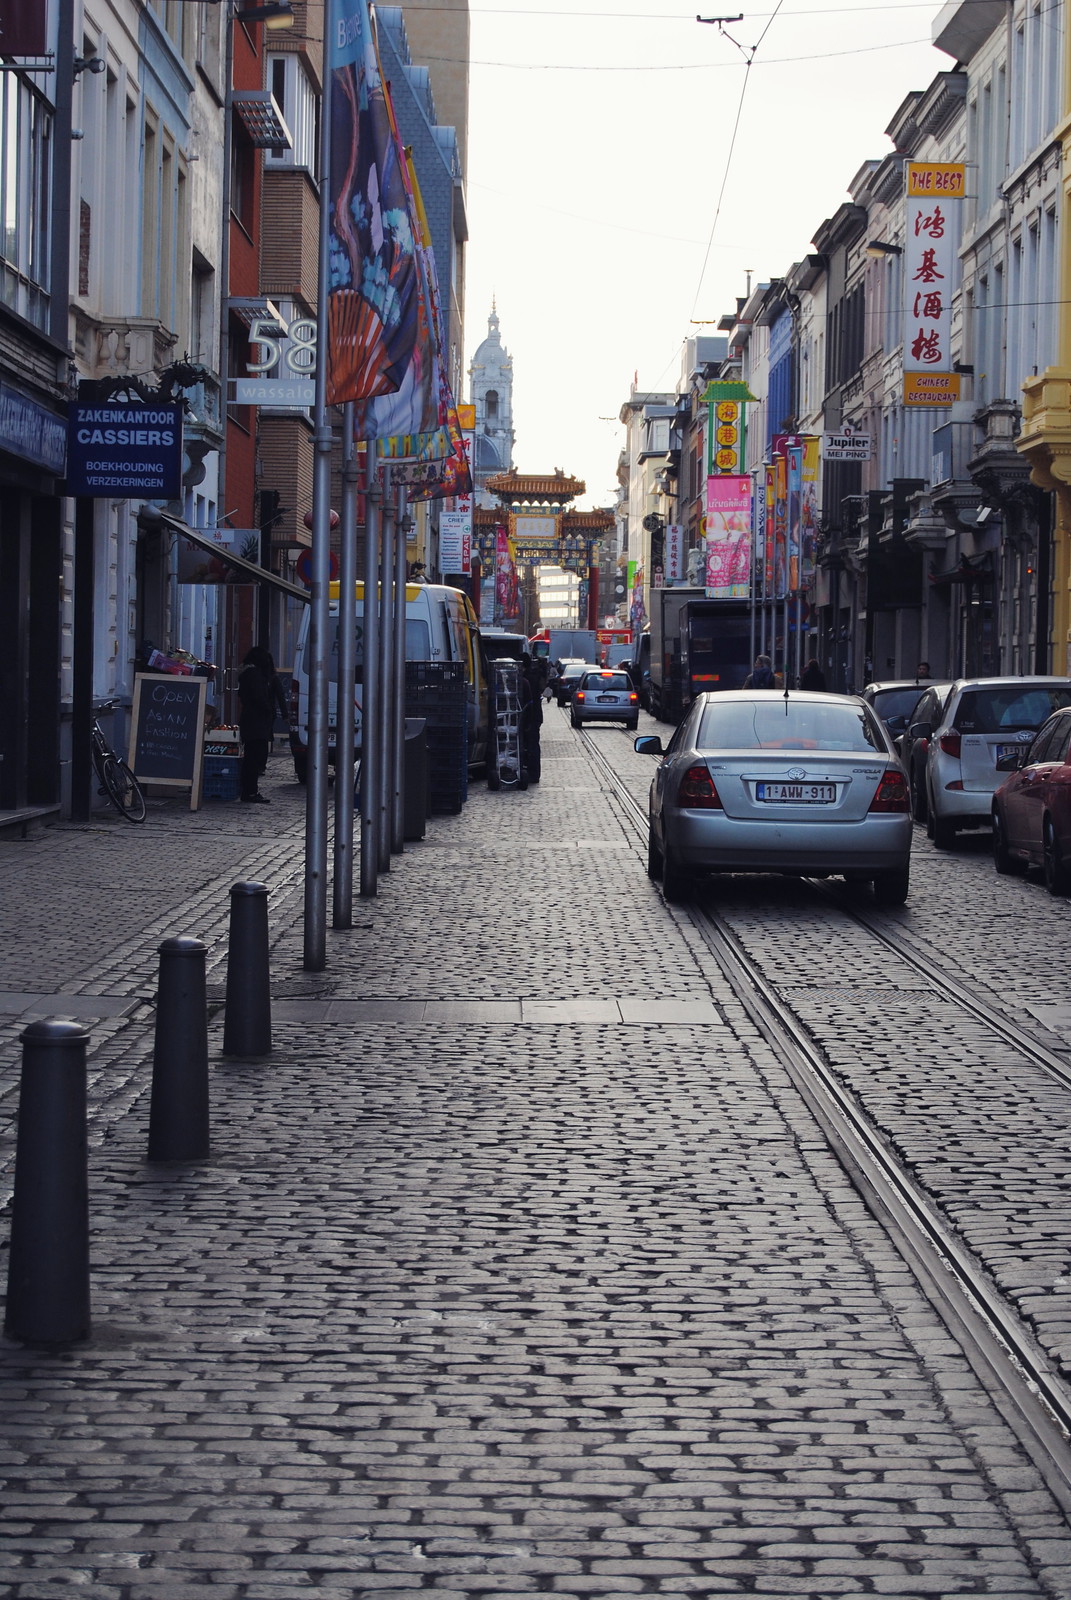 A street view of Antwerp's Chinatown.